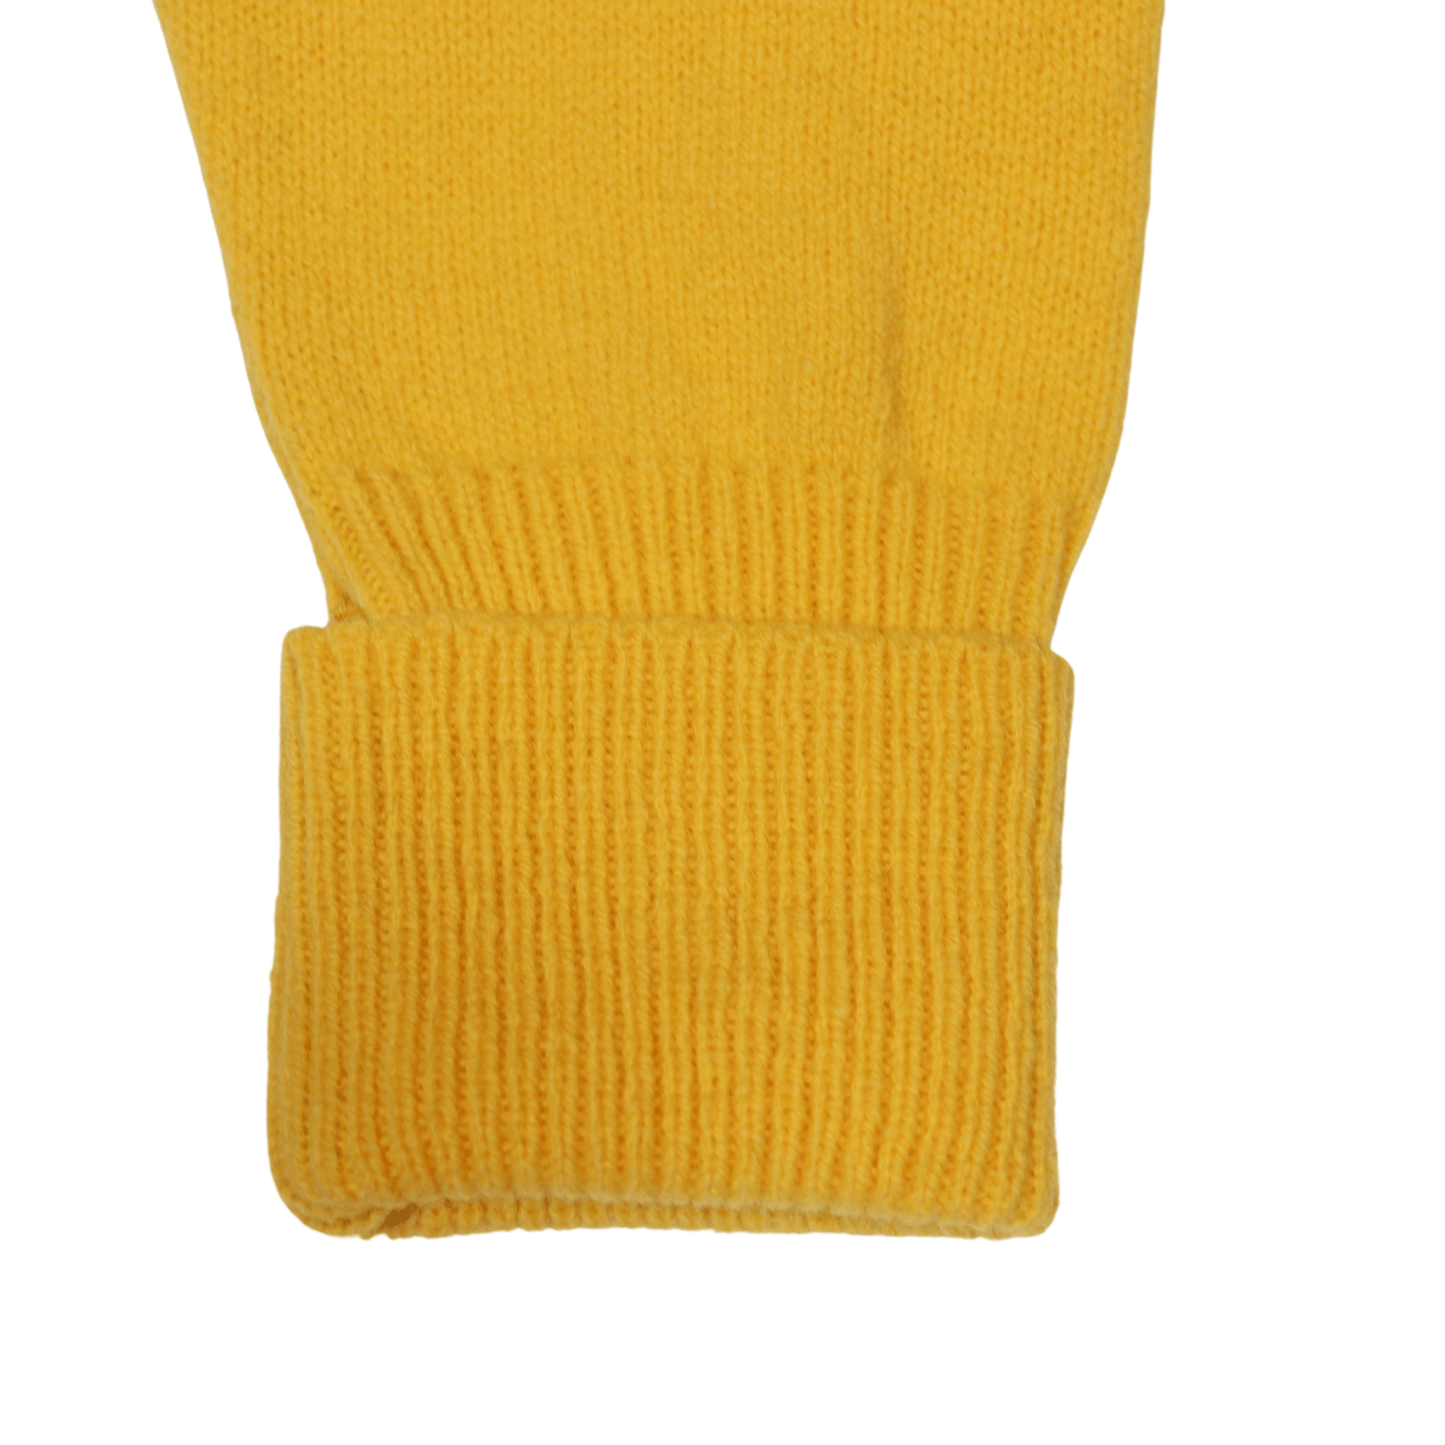 Stay warm and stylish with the Loch Lomond 100% lambswool long-sleeve jersey in Yellow (3696). Made from premium lambswool, this jersey offers both comfort and durability. Perfect for chilly days and evenings, it's a versatile addition to any wardrobe. Shop in-store at 337 Monty Naicker Street, Durban or online at www.omarstailors.com